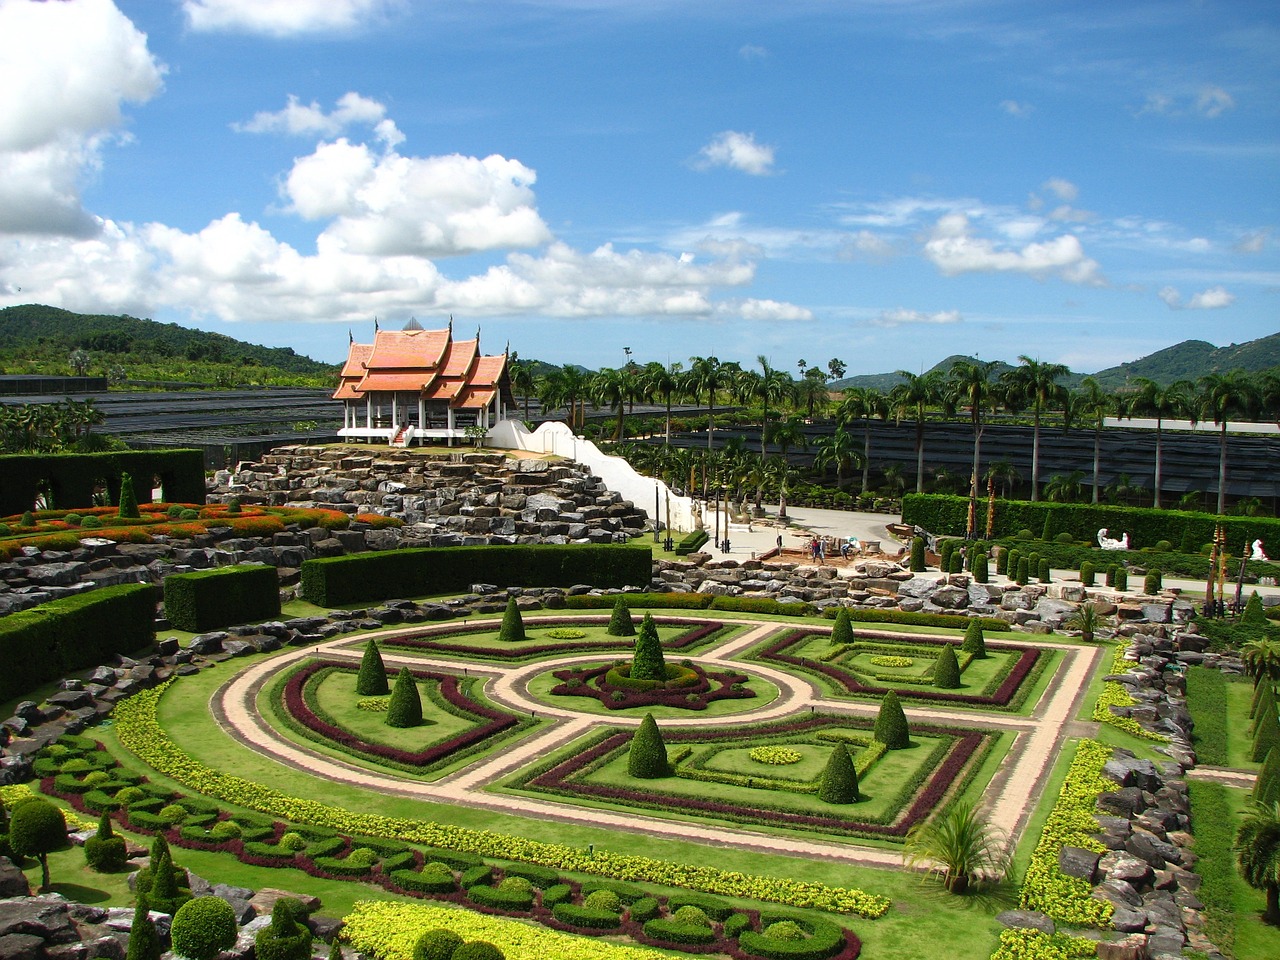 Overview Of The Beautifully Landscaped Gardens Of Nong Nooch In Pattaya